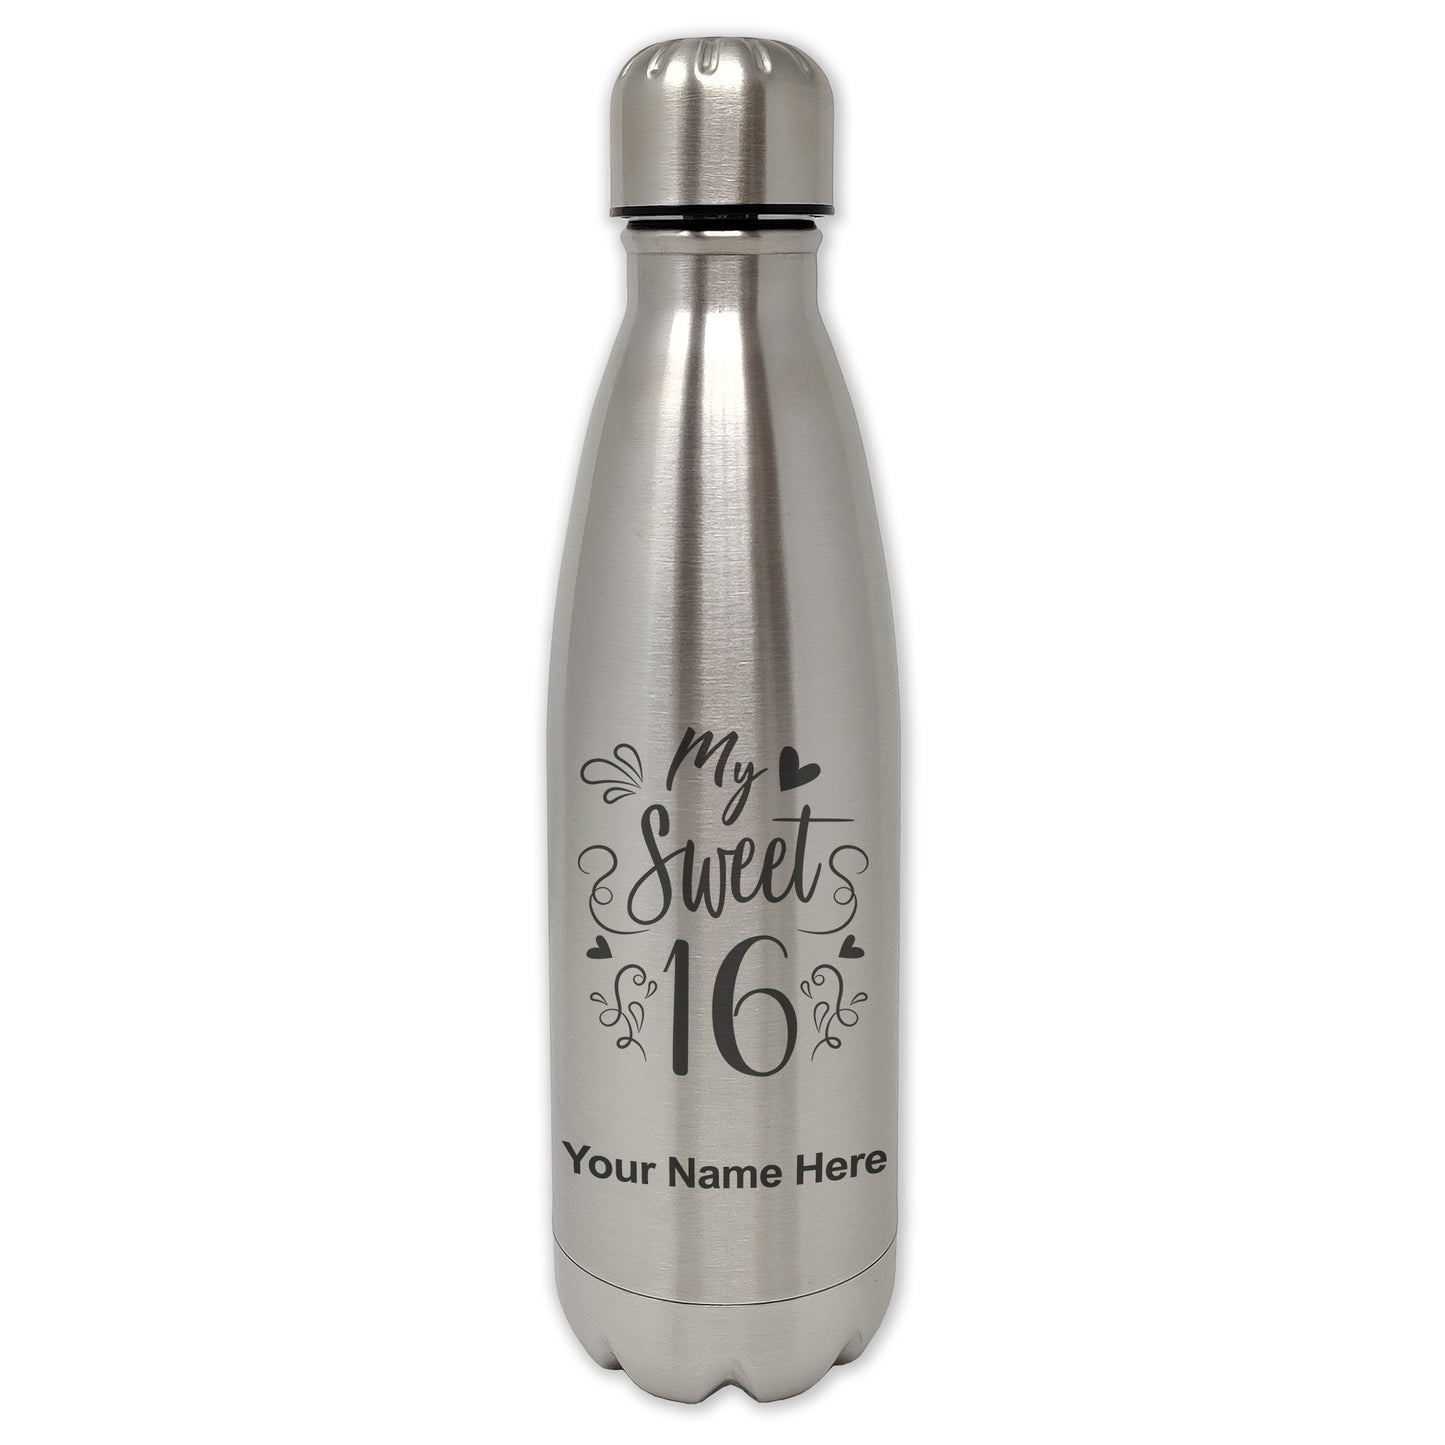 LaserGram Single Wall Water Bottle, My Sweet 16, Personalized Engraving Included